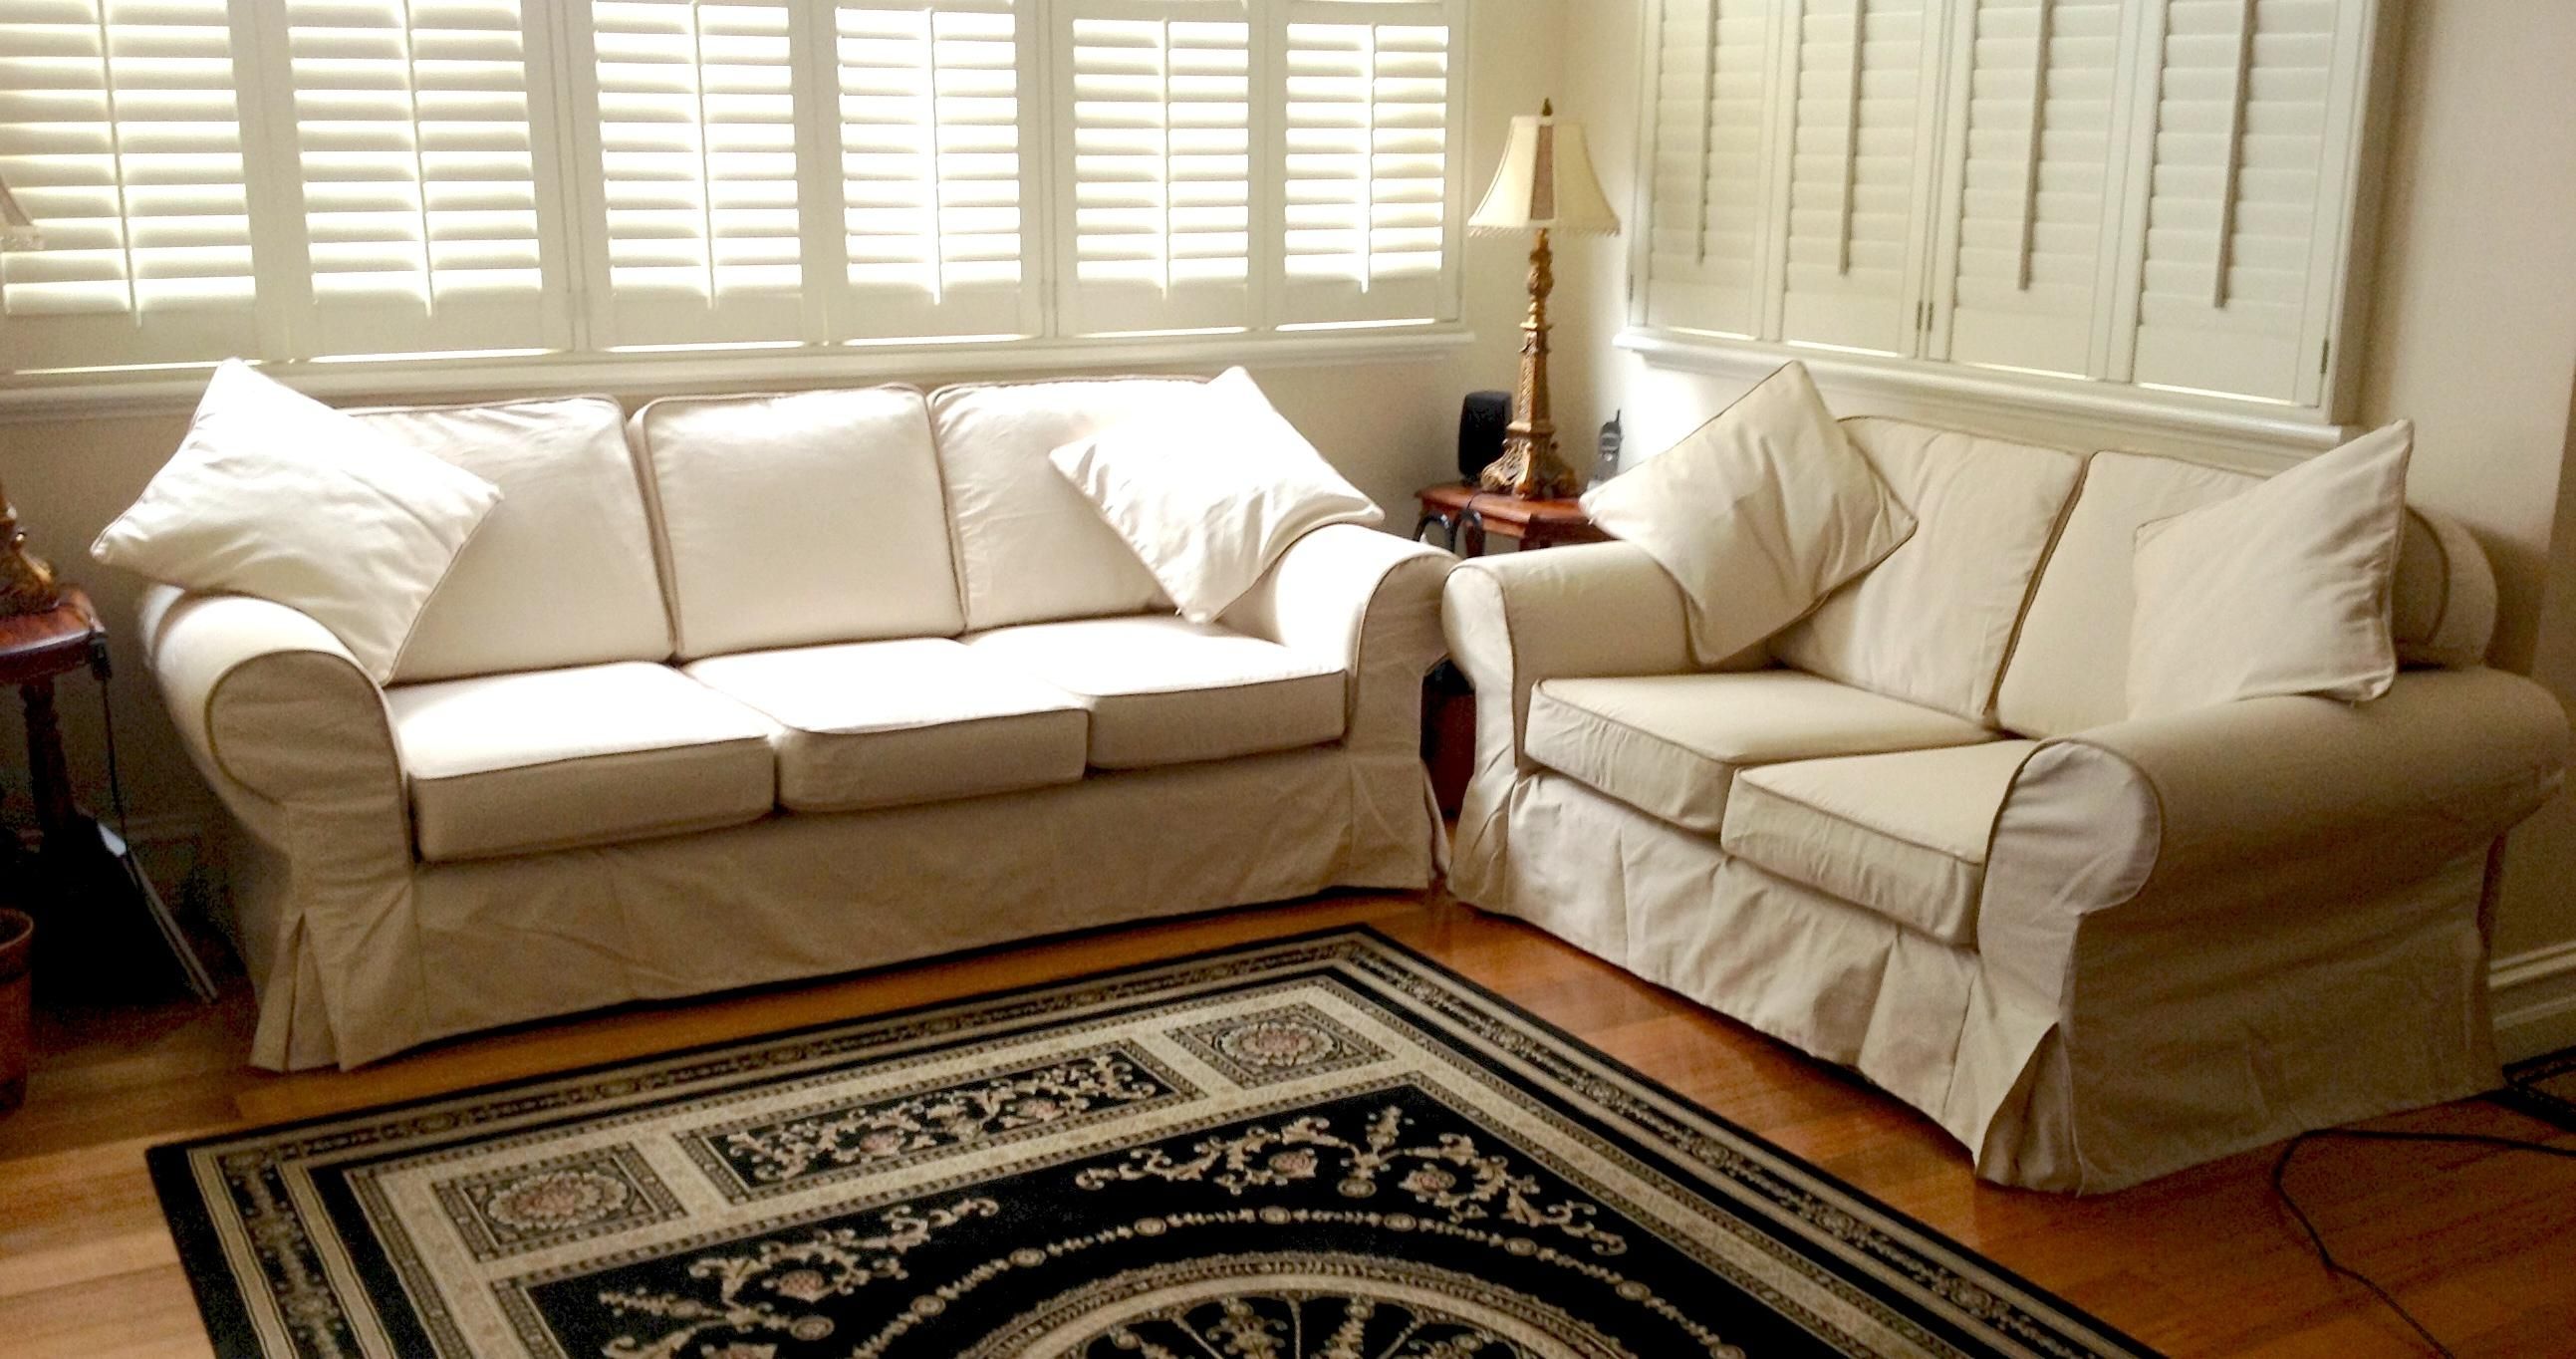 Custom Slipcovers And Couch Cover For Any Sofa Online With Slip Covers For Love Seats (View 1 of 20)